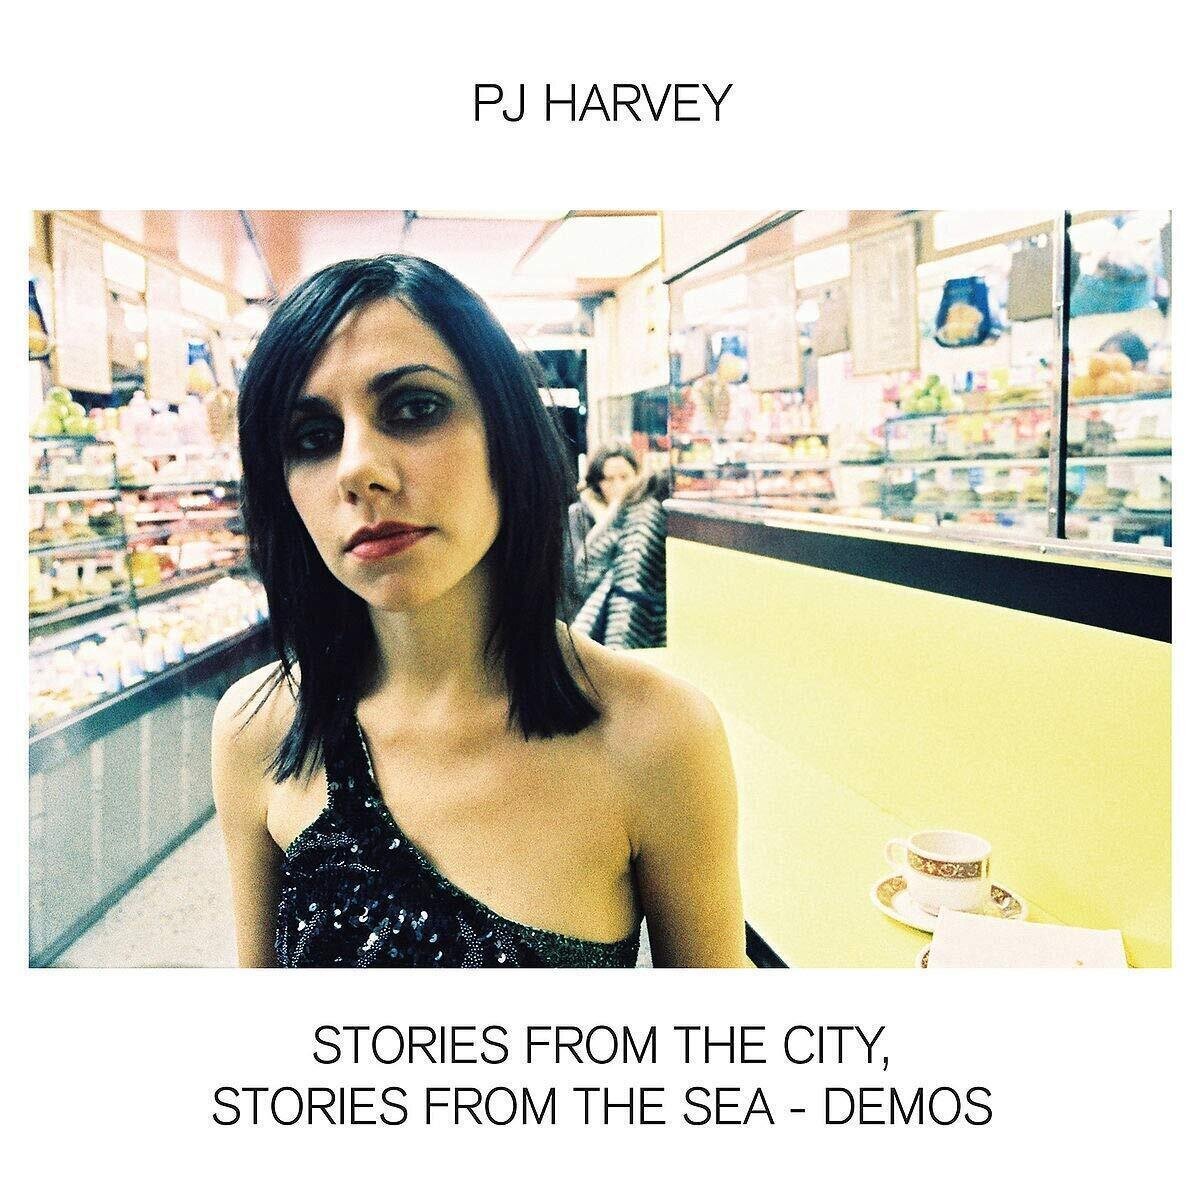 CD musique PJ Harvey - Stories From The City, Stories From The Sea - Demos (CD)